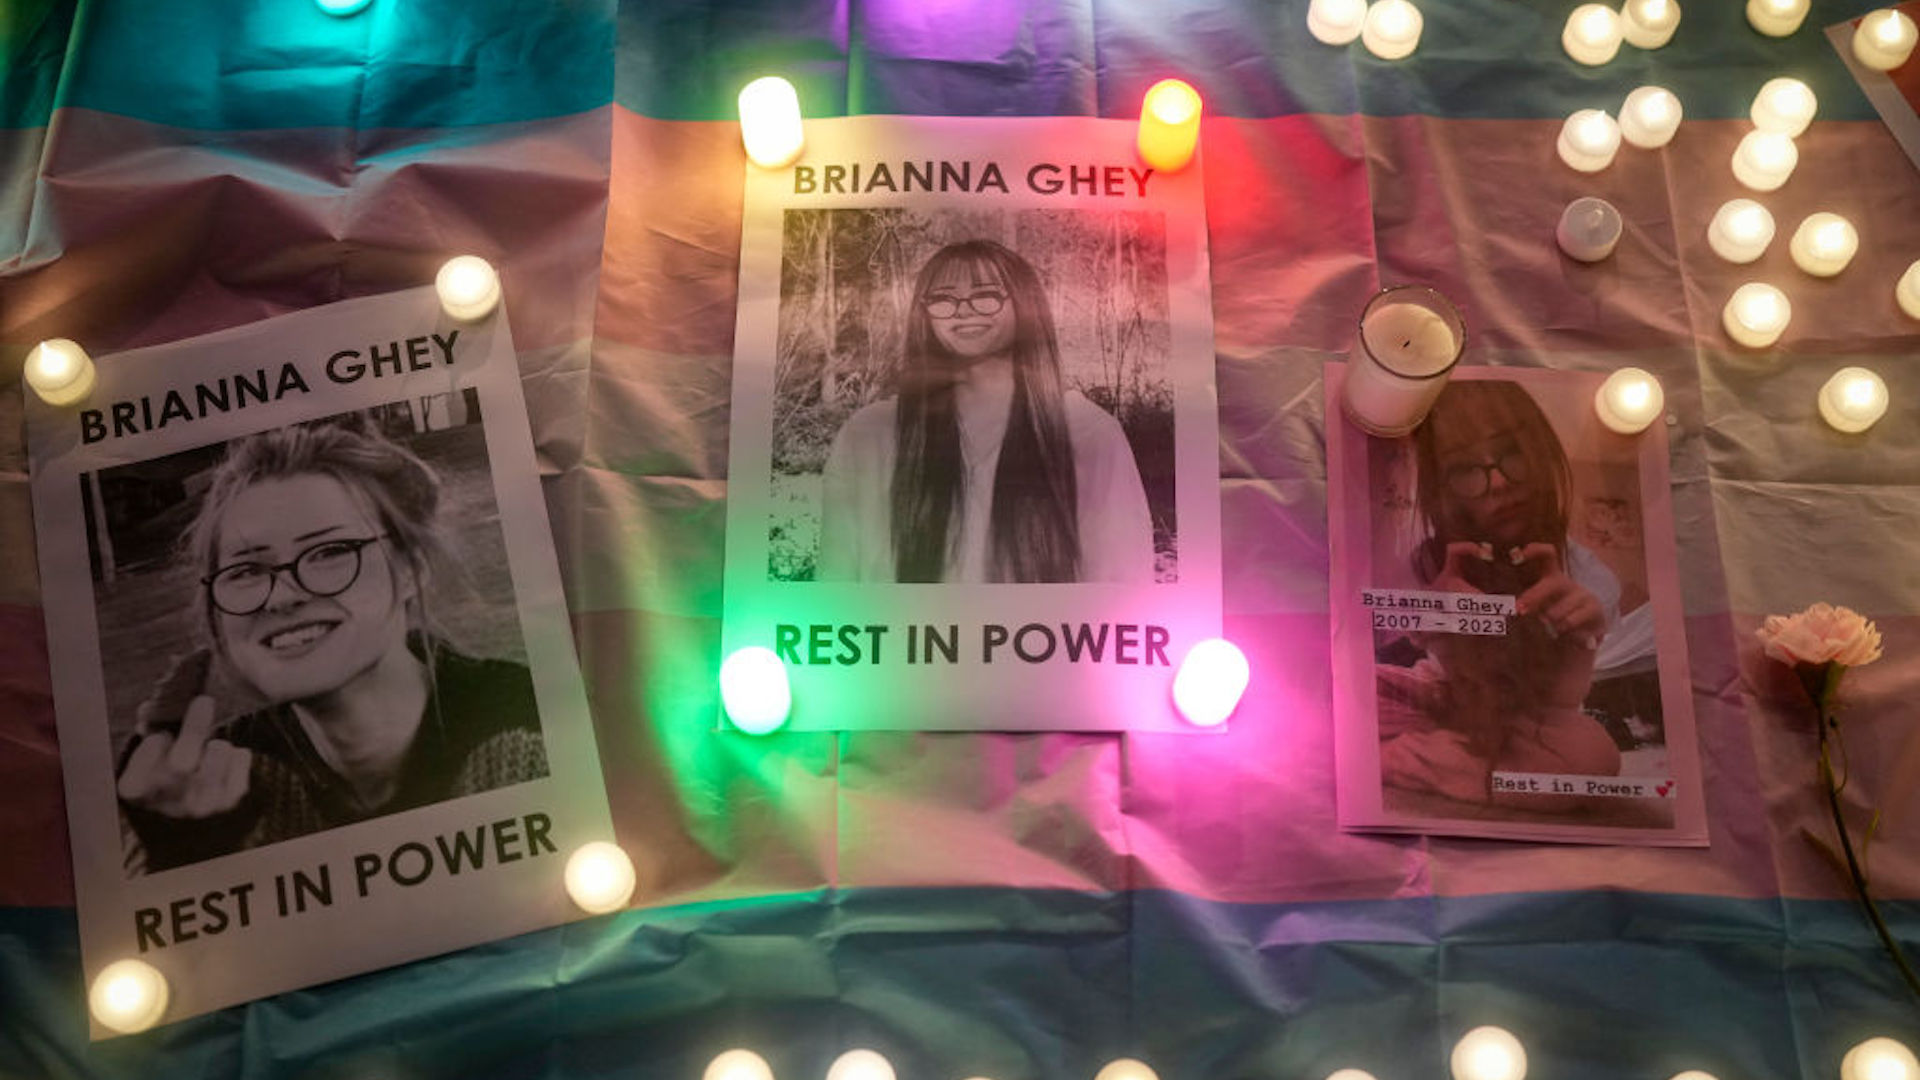 Pictures of 16-year-old Brianna Ghey with the message 'REST IN POWER' are displayed surrounded by candles during a candlelit vigil in her memory on February 14, 2023 in Liverpool, England.